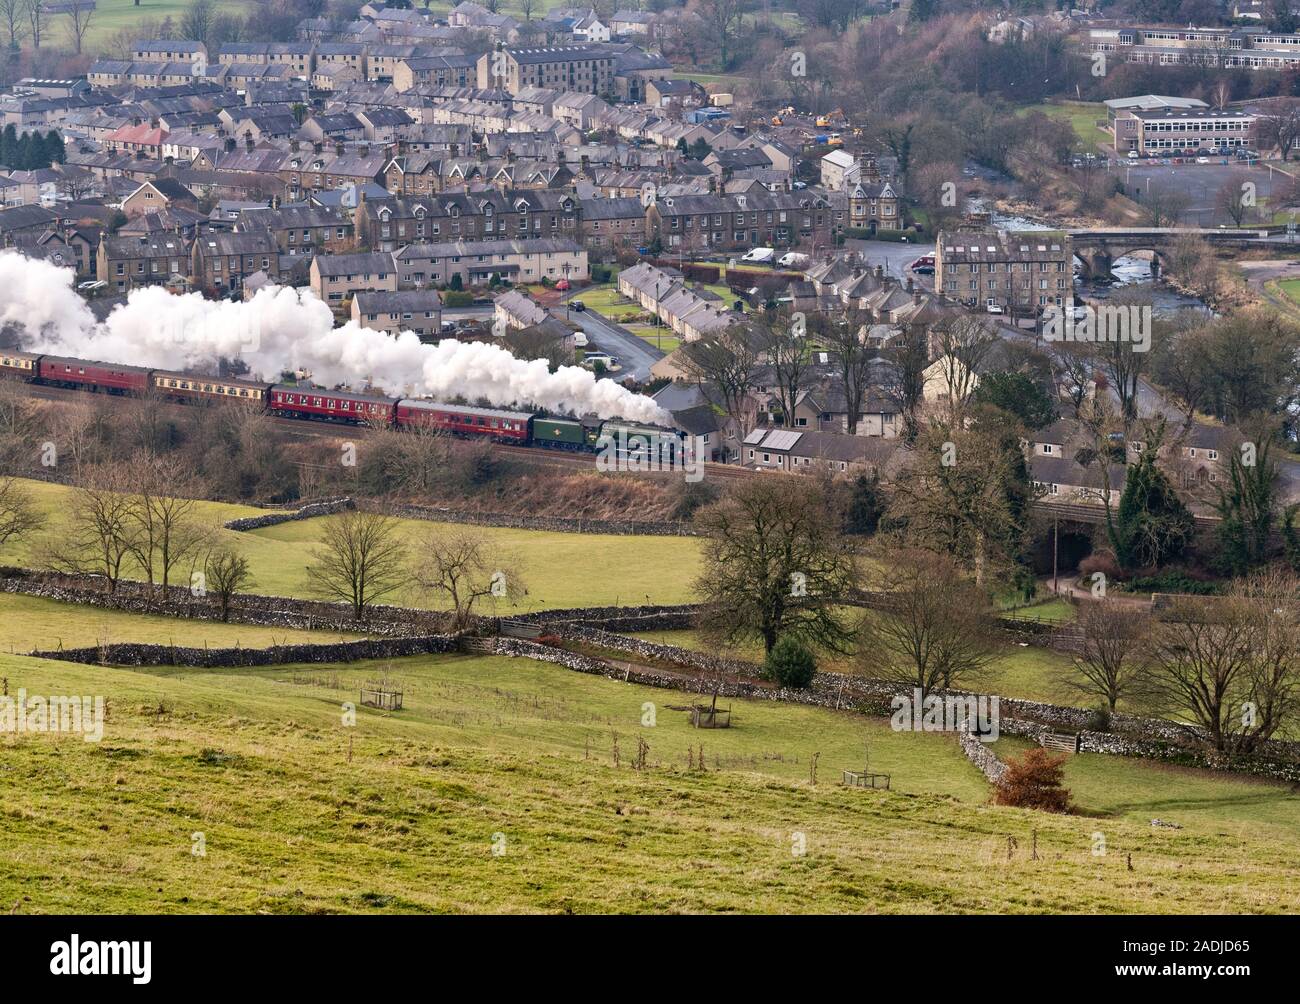 Settle, North Yorkshire, UK. 4th Dec, 2019. The Flying Scotsman steam locomotive with 'The Christmas Dalesman' steam special. Seen here at Settle travelling north to Carlisle on the famous Settle to Carlisle railway line, on a round trip from Manchester. The return trip was via Shap on the West Coast main line. Credit: John Bentley/Alamy Live News Stock Photo